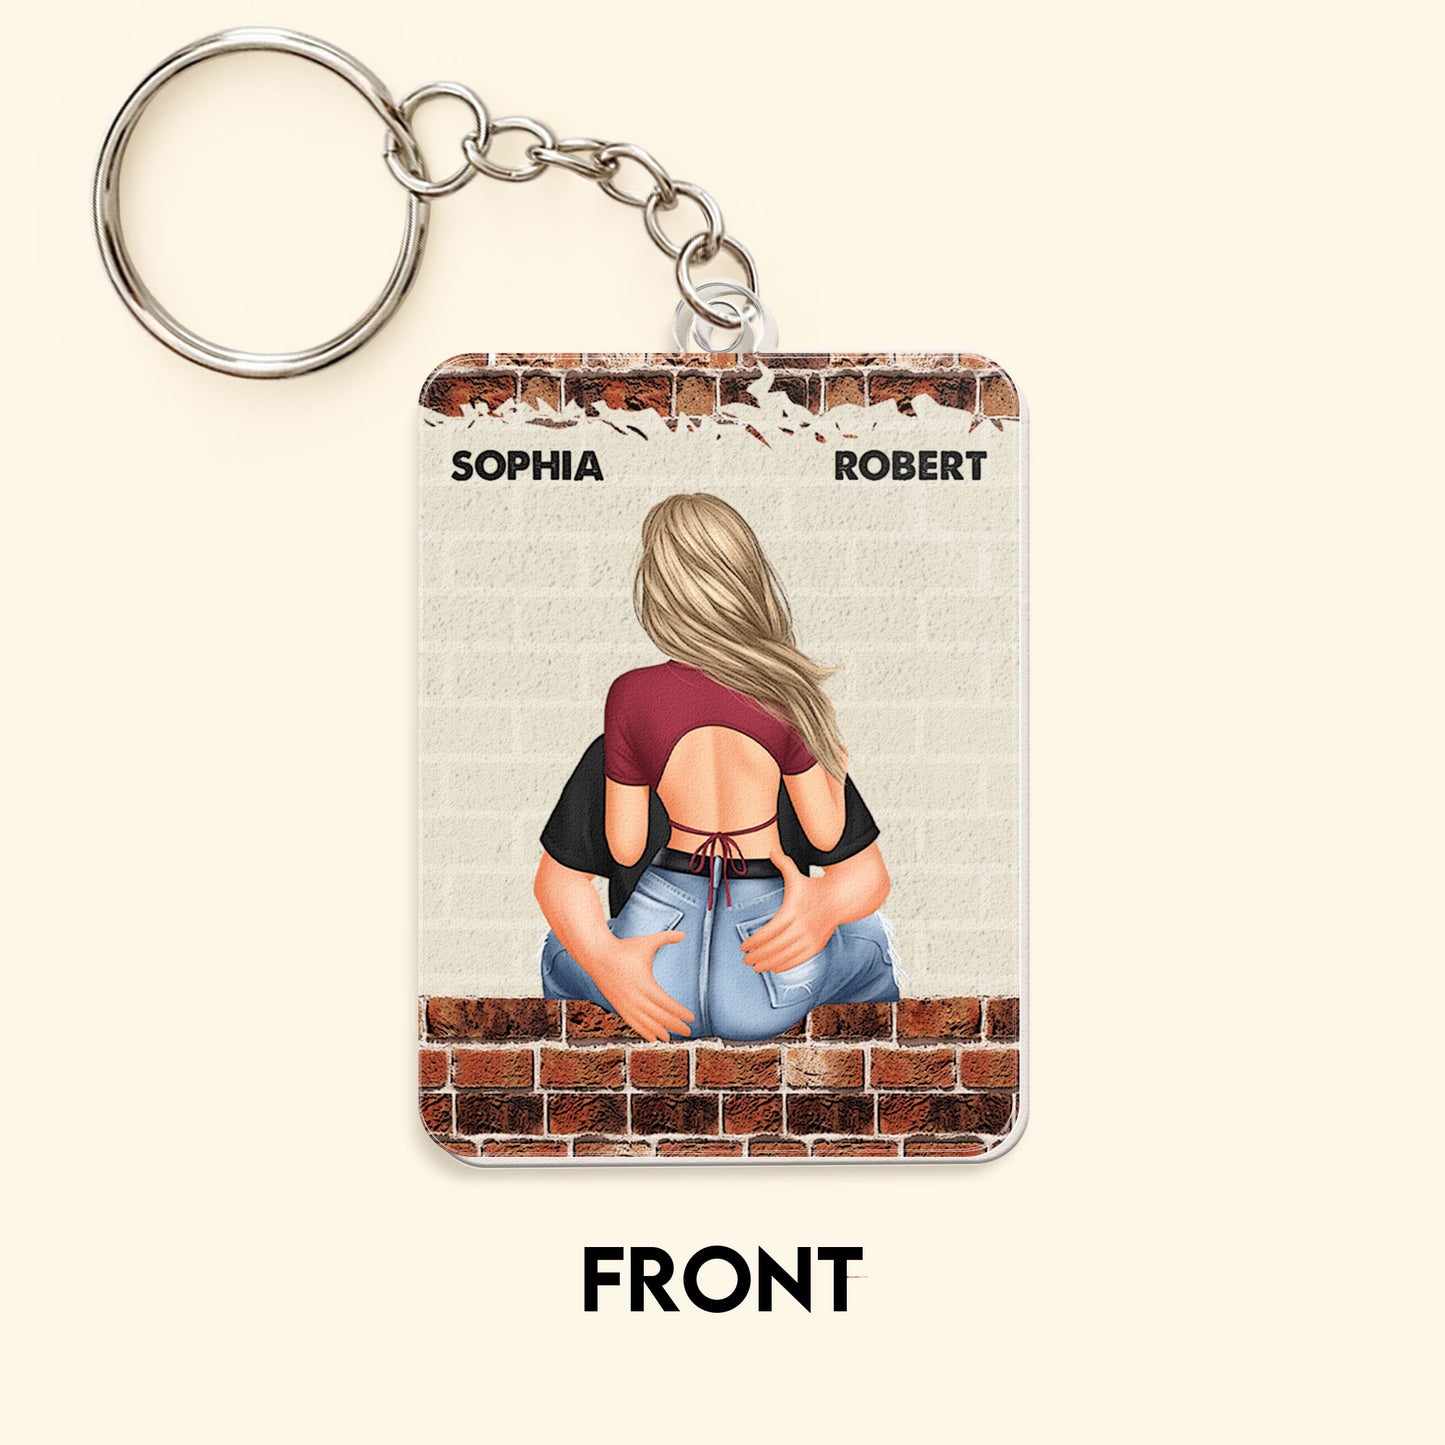 Drive Safe No One Else Will Tolerate Me - Personalized Acrylic Keychain